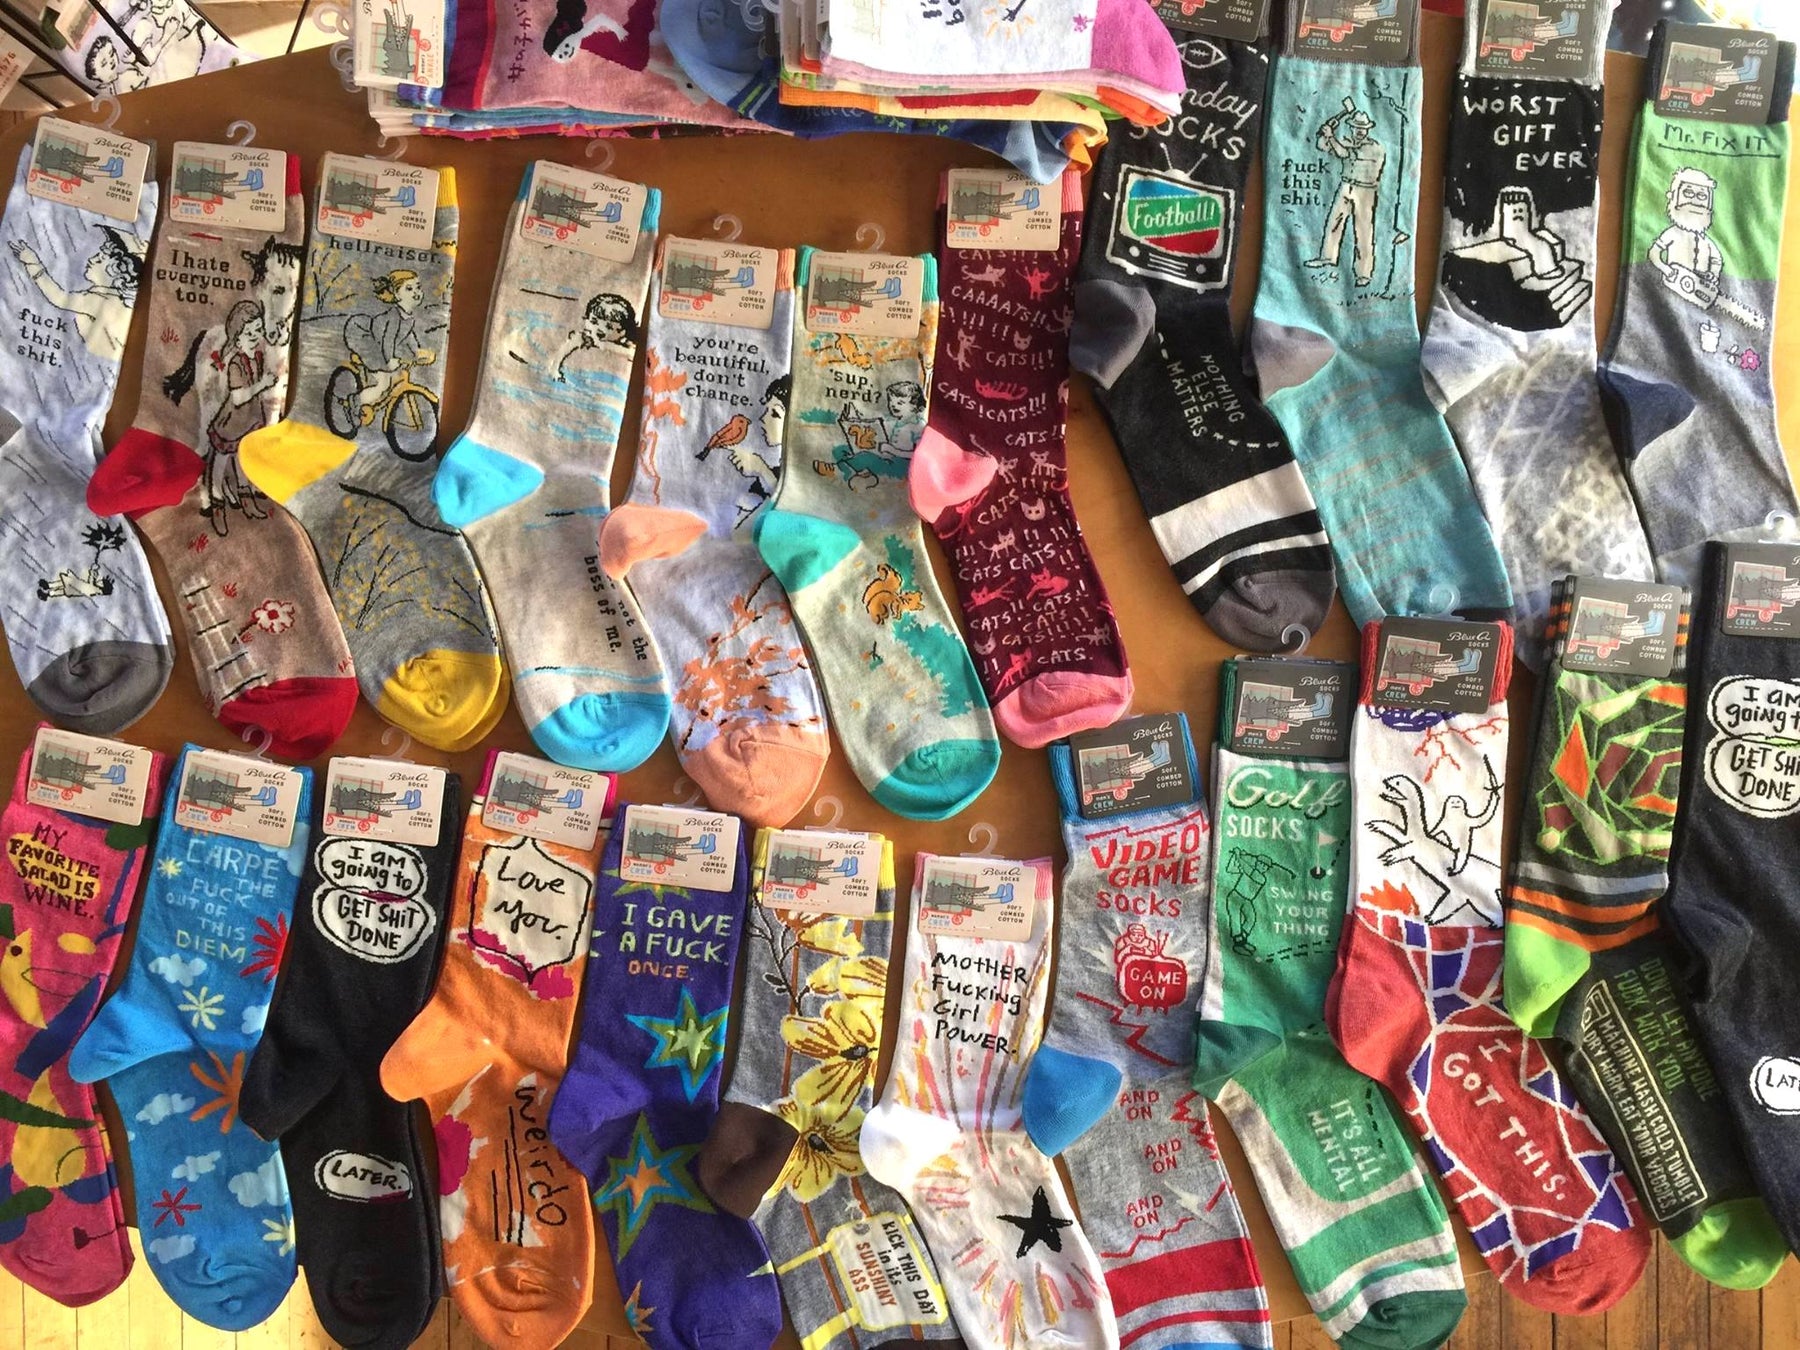 Collection of dozens of Blue Q socks